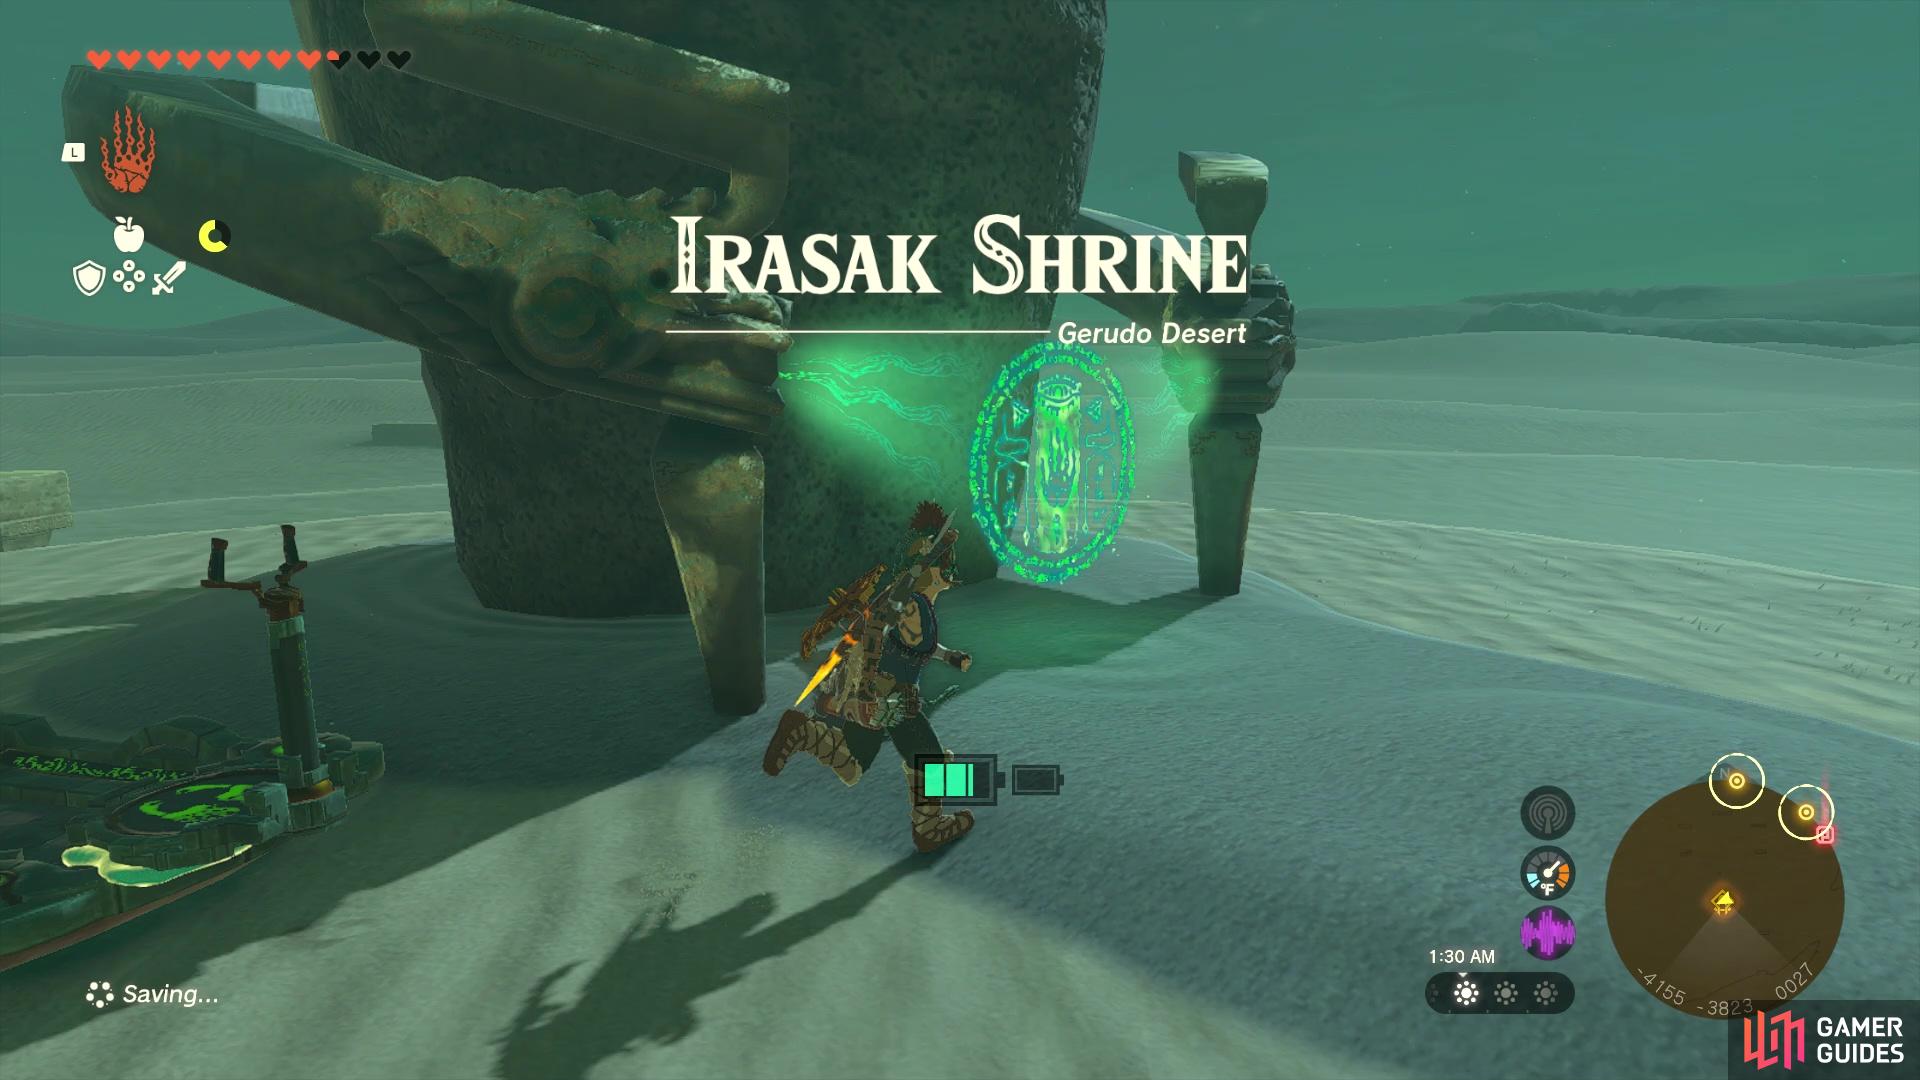 The Irasak Shrine is located just southeast of the Lightning Temple.